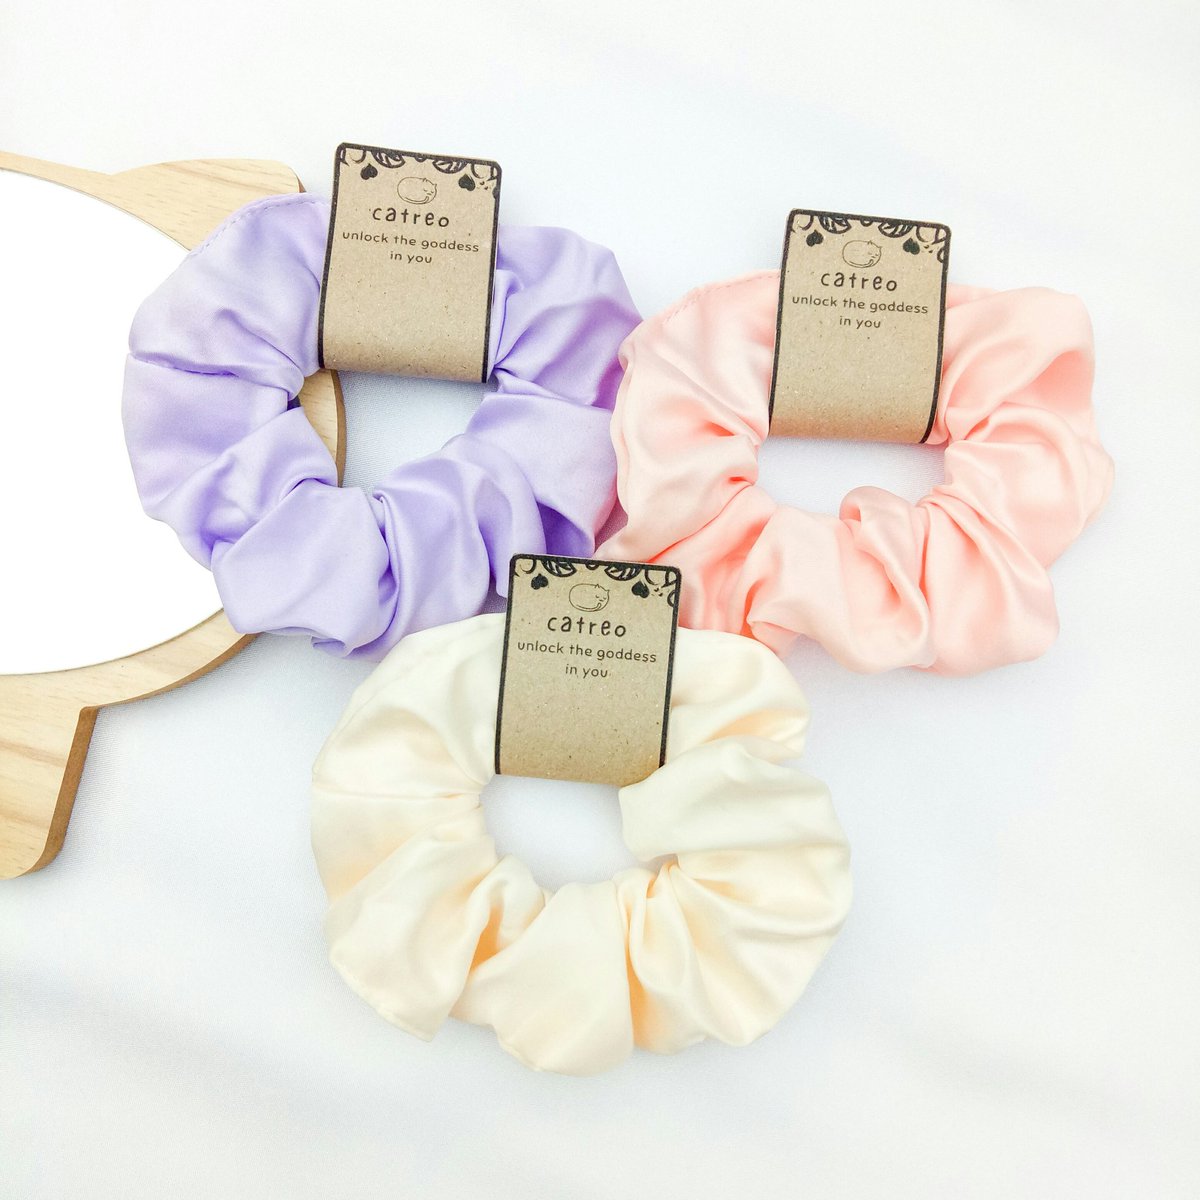 Are you still wearing a normal rubber hair tie? Do you know that scrunchies are wayyy better than hair ties? LET'S START WEARING SCRUNCHIES FOR THESE REASONS-